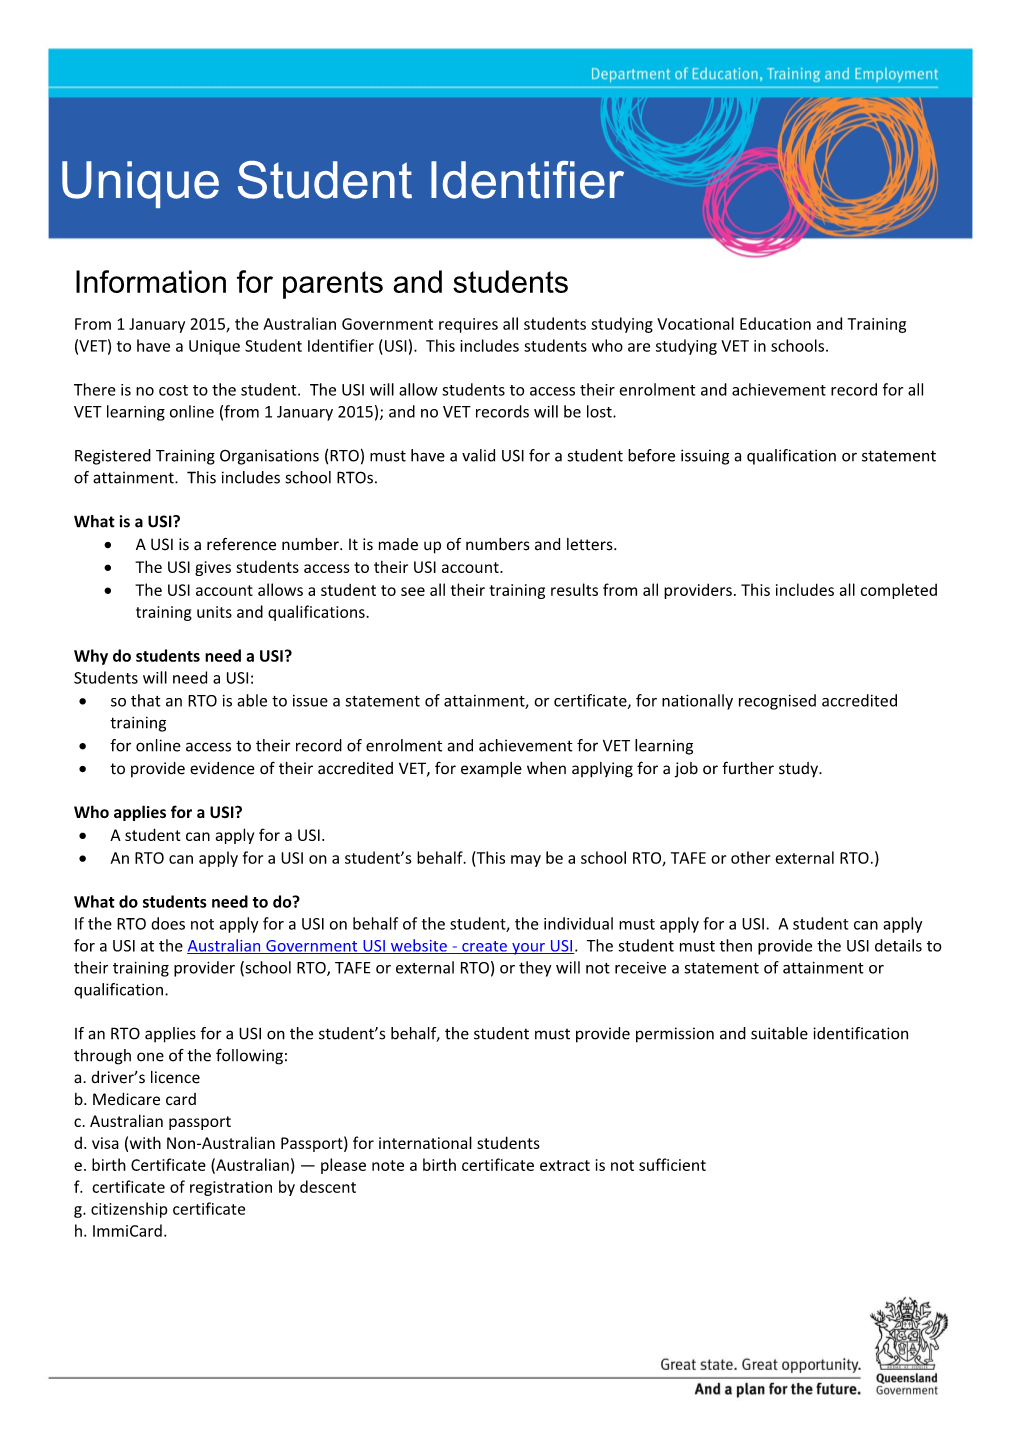 Unique Student Identifier (USI) Fact Sheet for Parents and Students